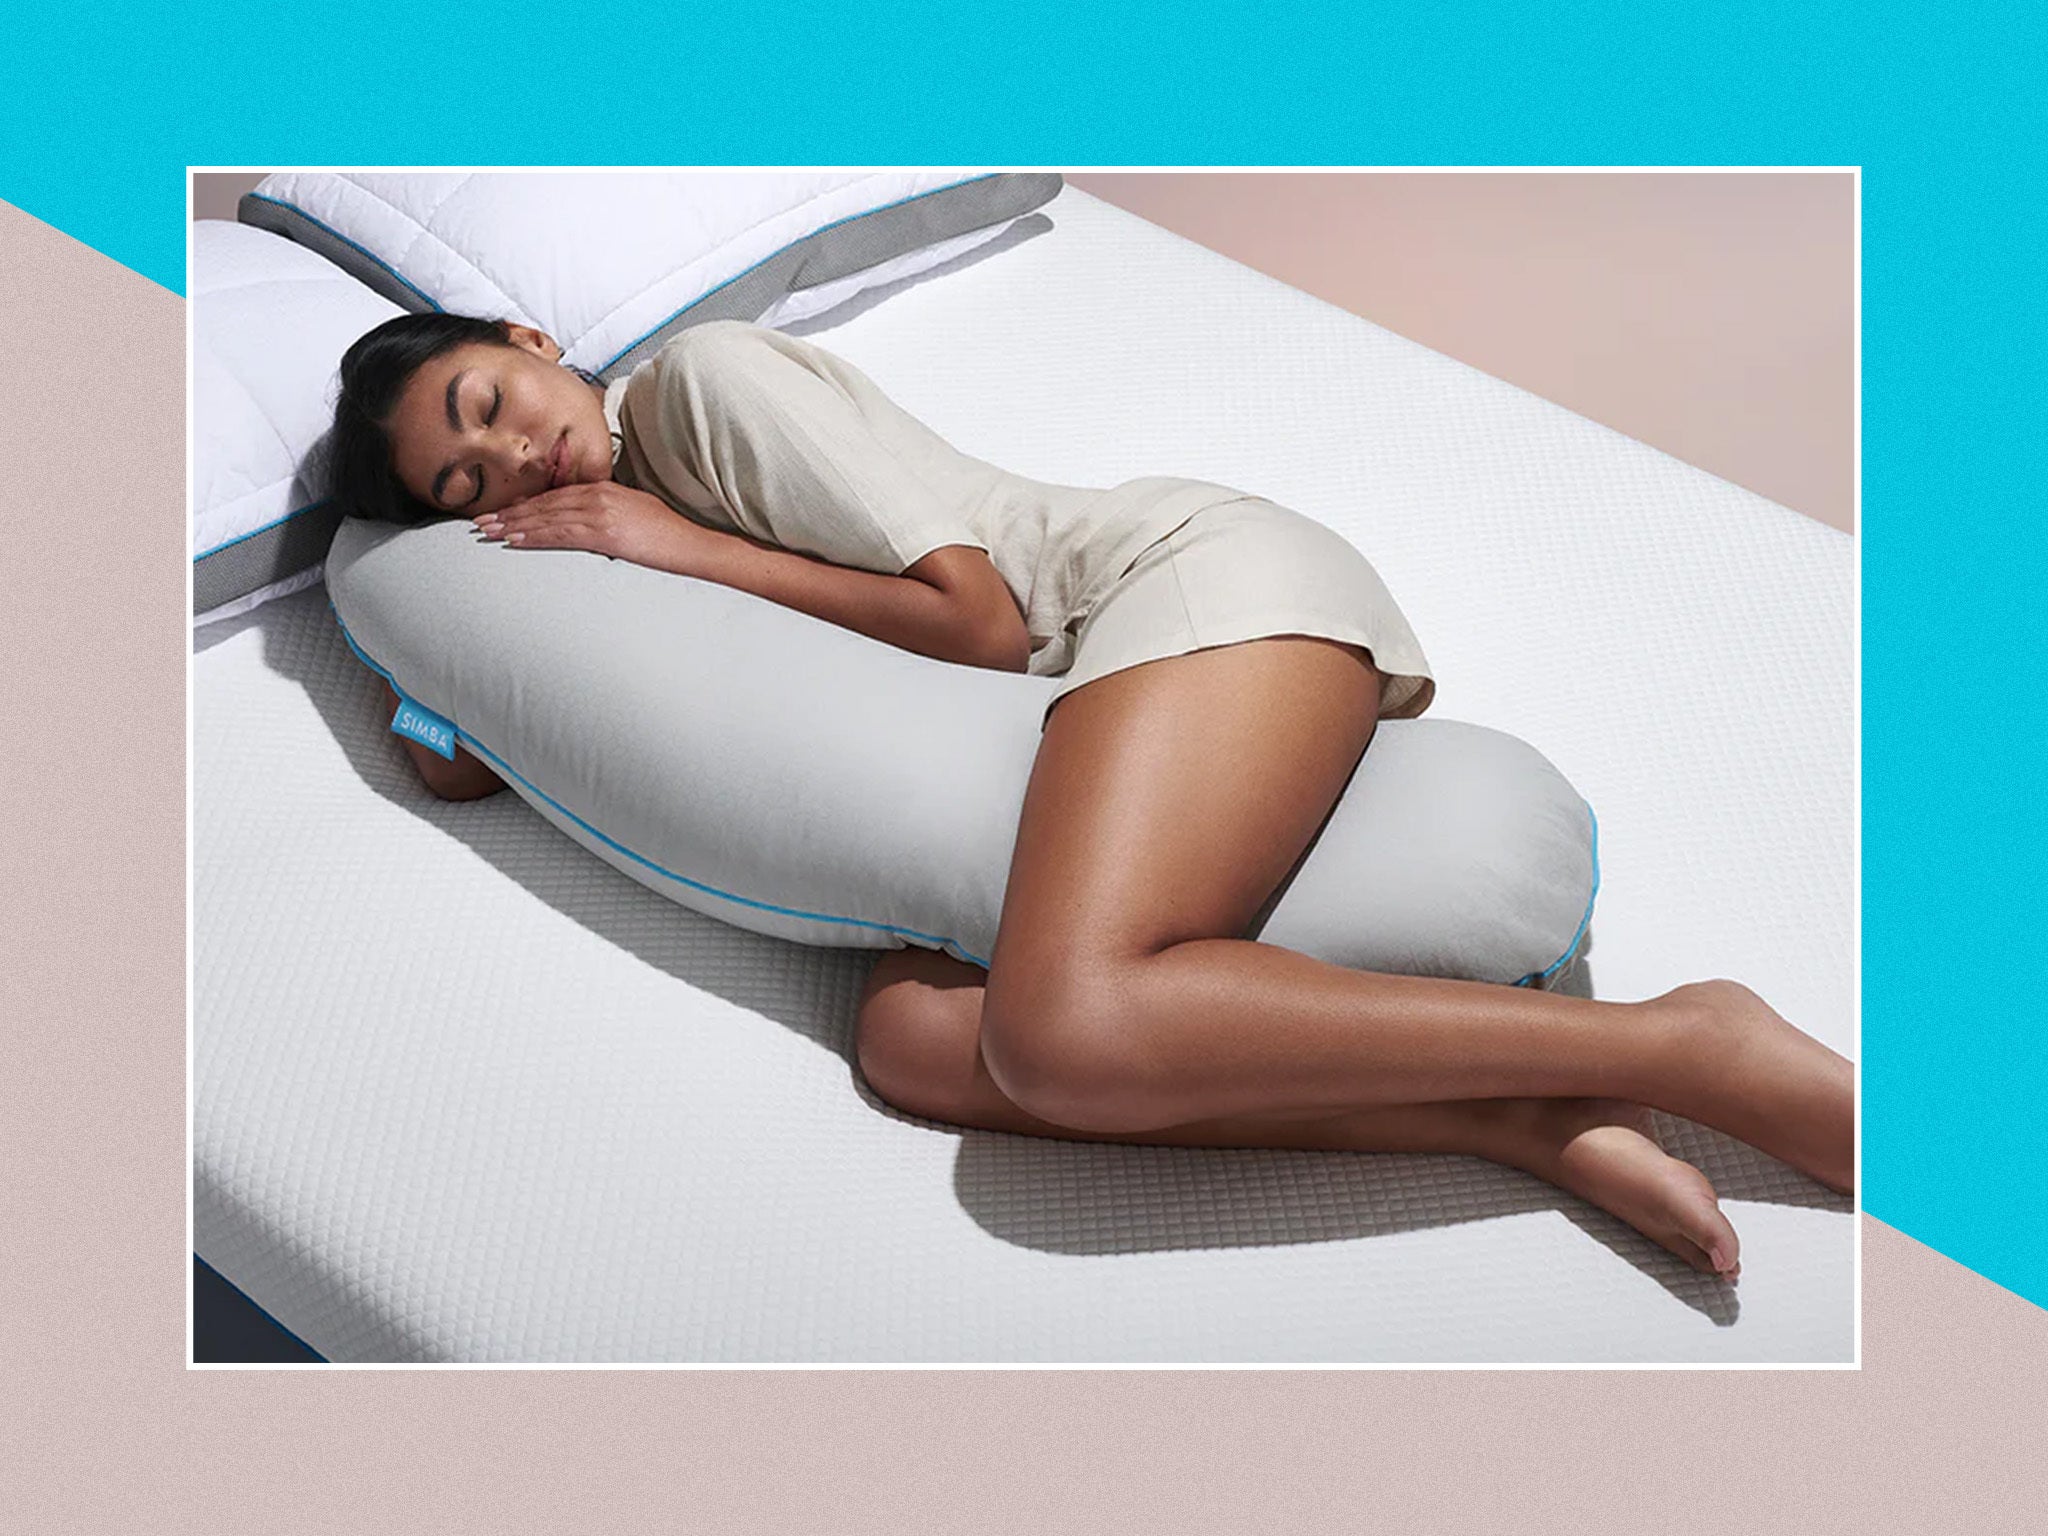 Simba cooling body pillow review: This pillow transformed our